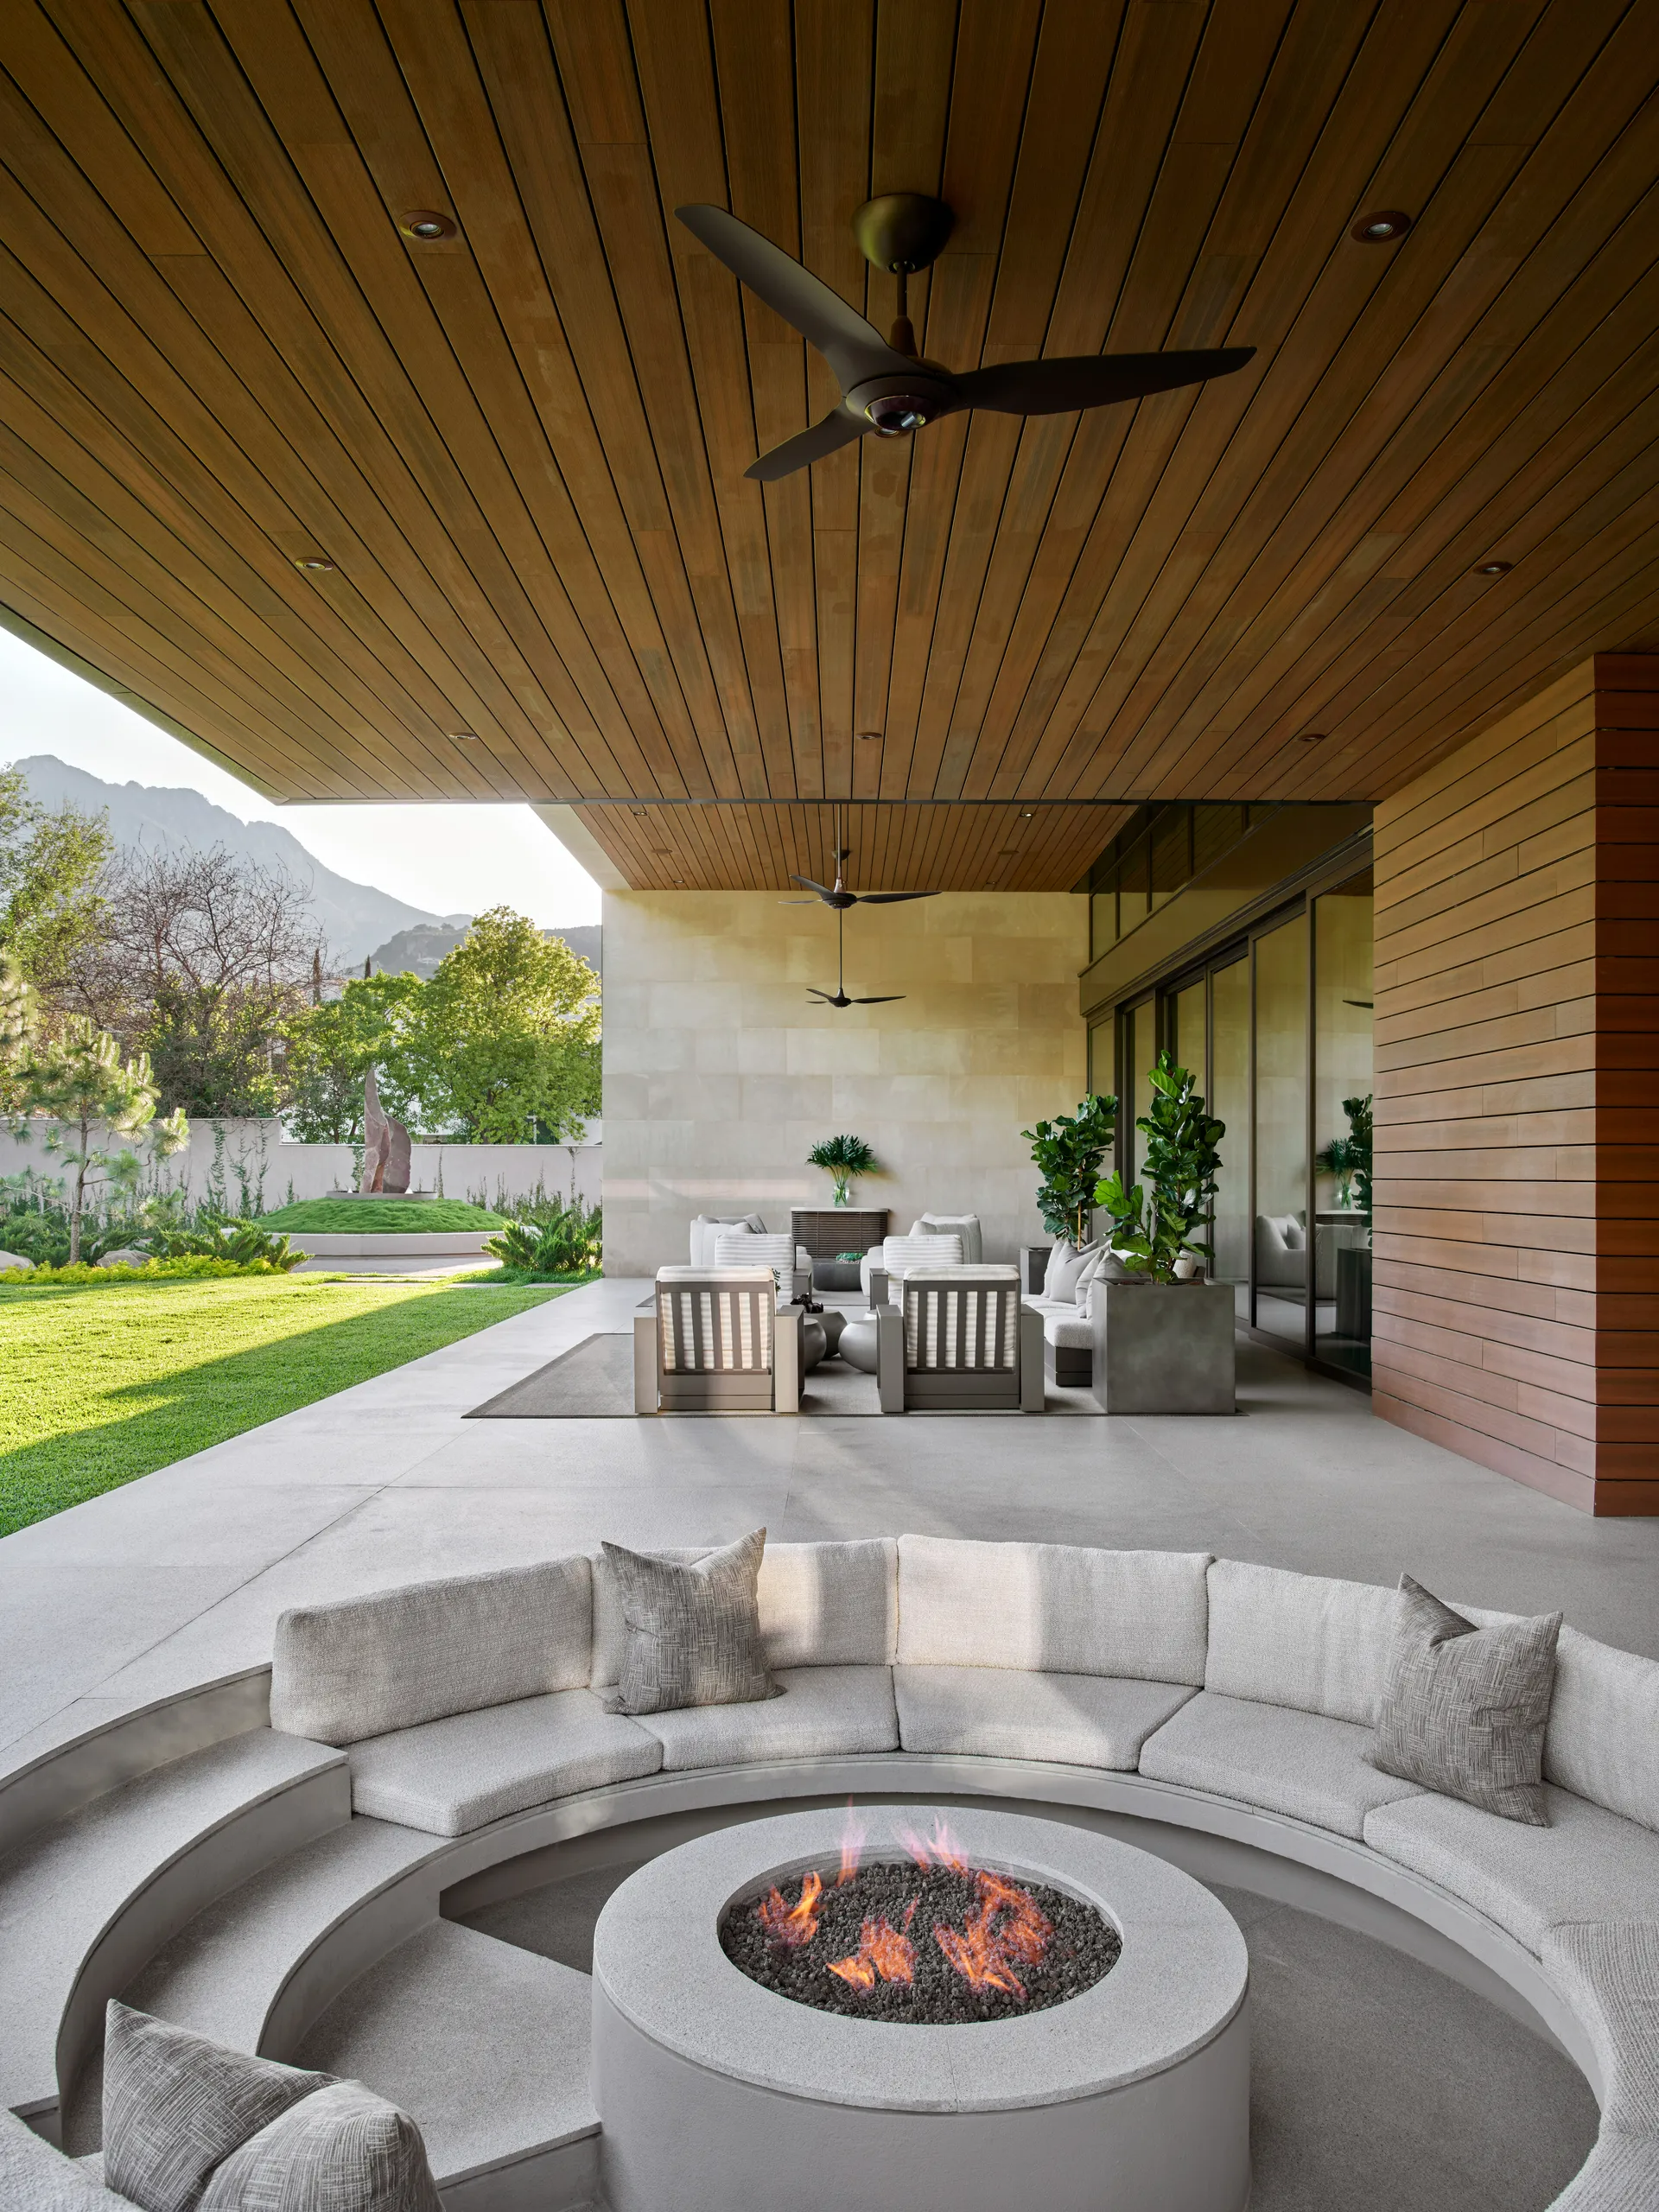 Creating Your Dream Outdoor Oasis: Patio
Ideas for Any Budget